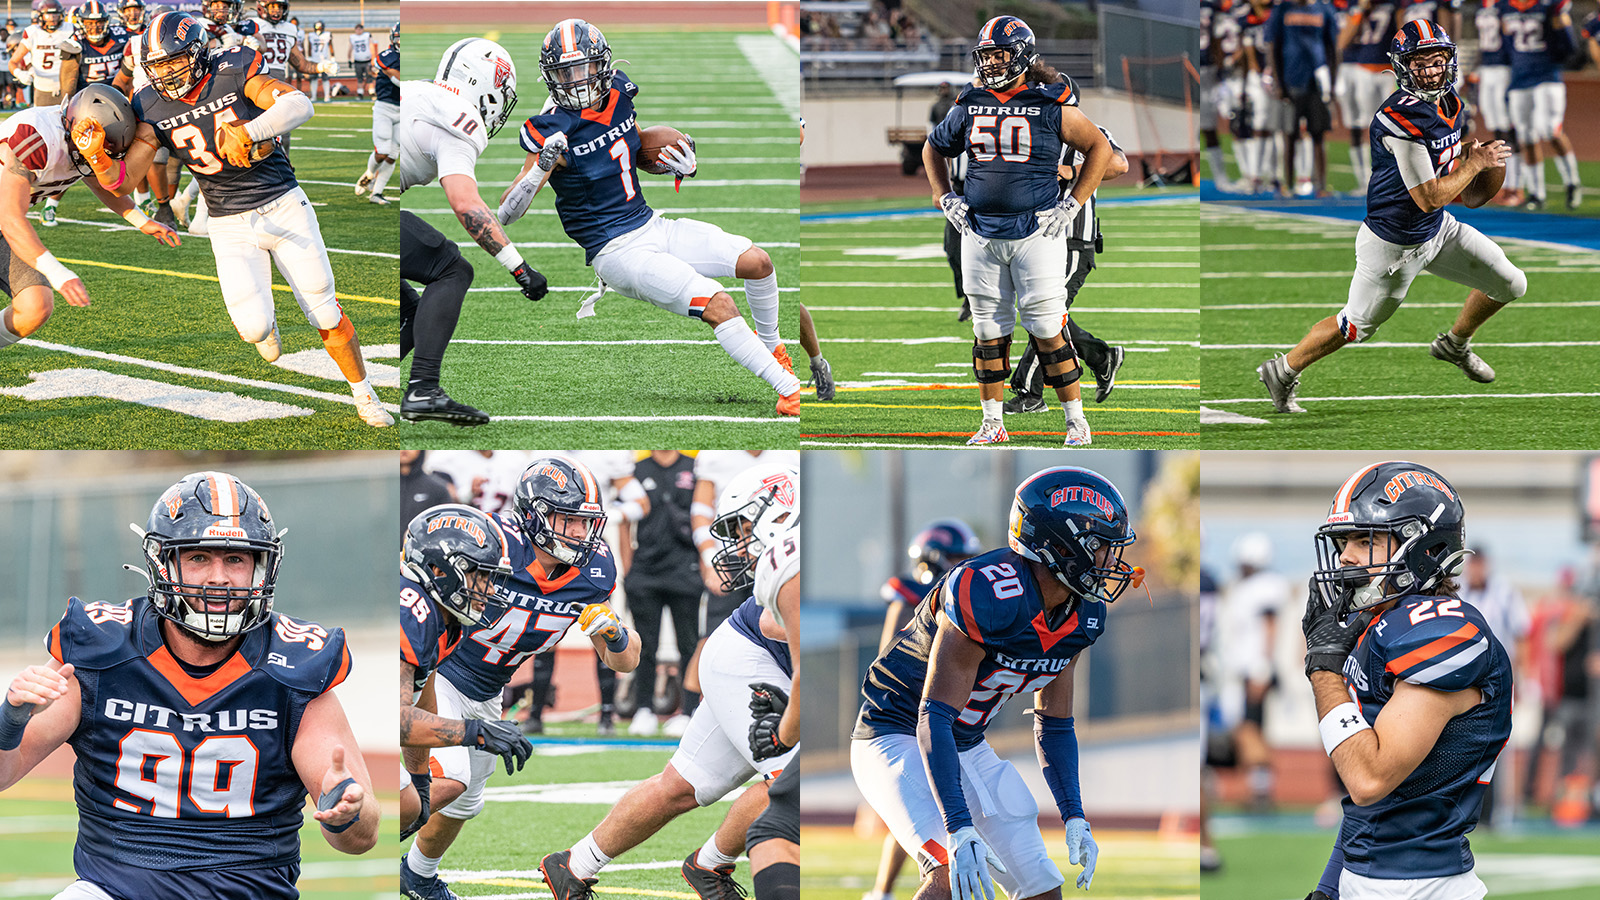 Eight Owls were named to the All-State Region IV teams after leading Citrus to a historic year. Photos by Jacob Bramley